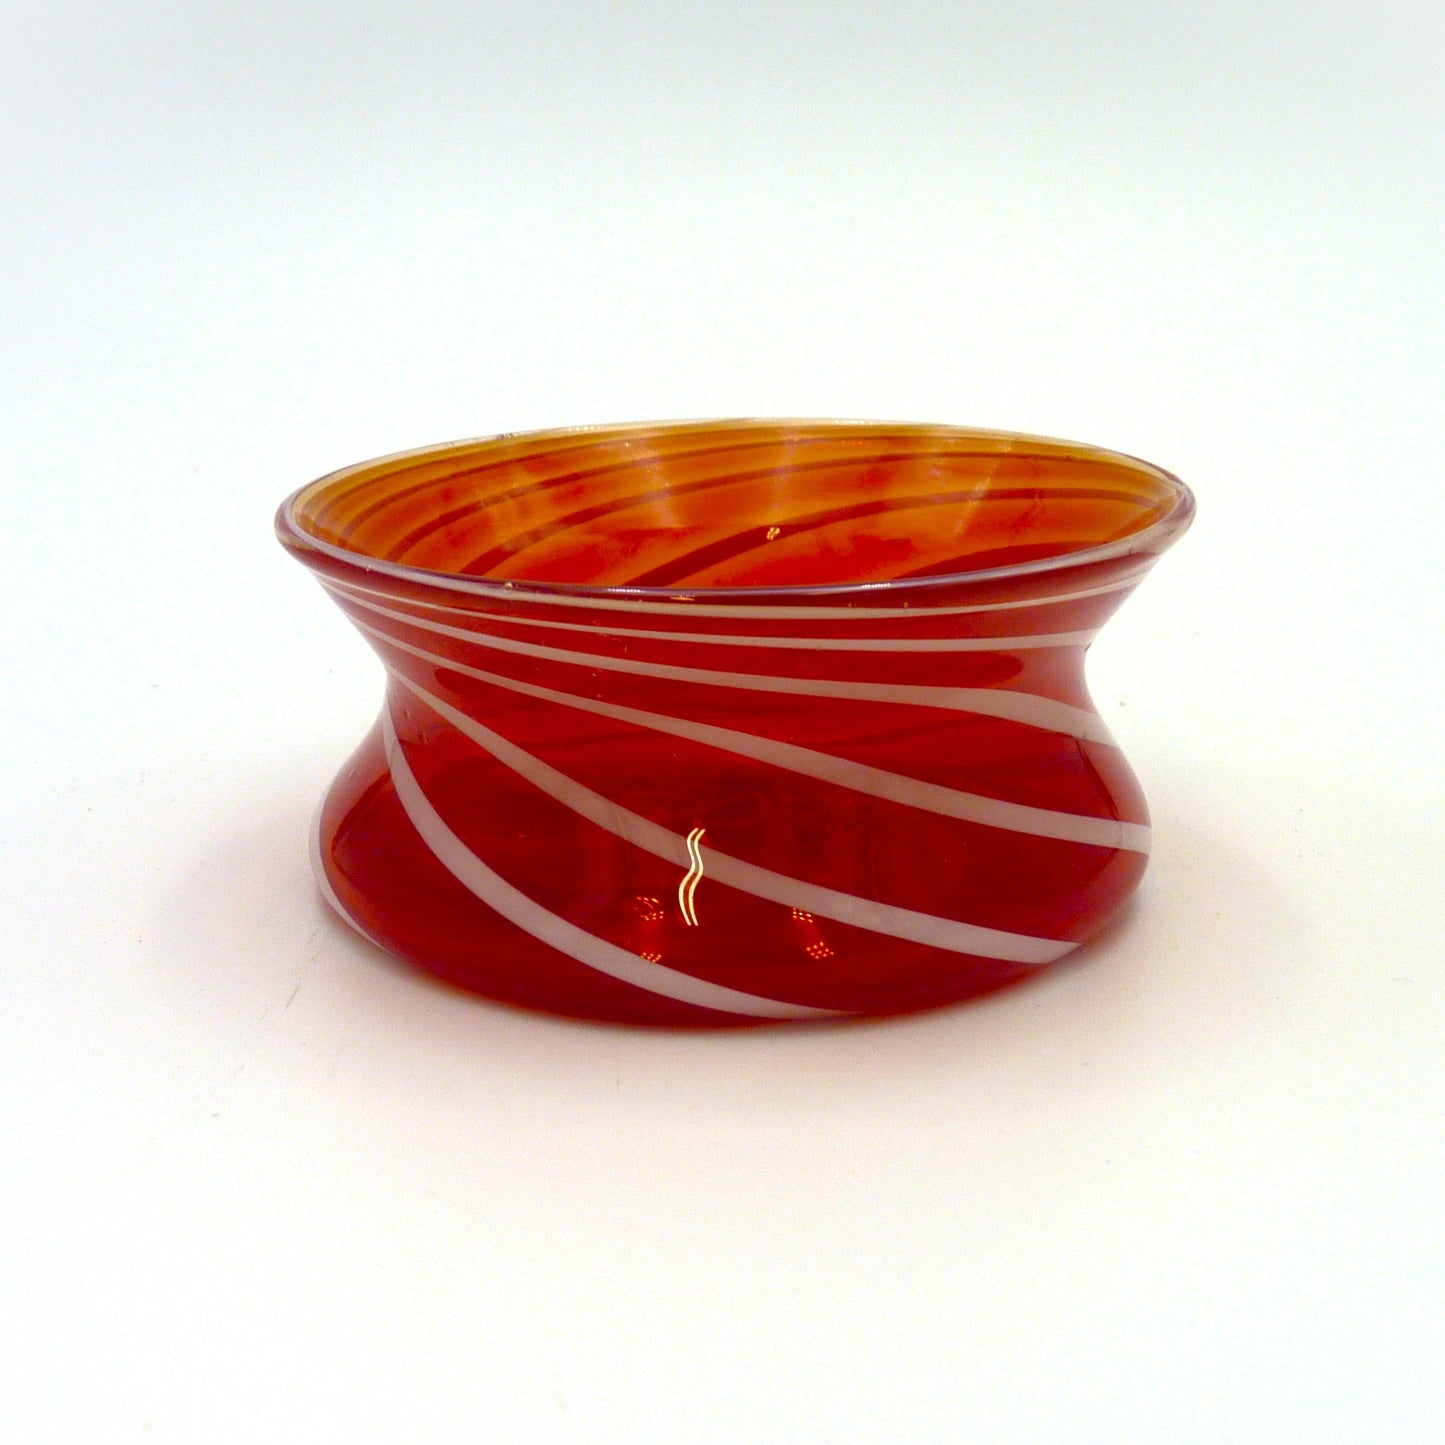 Salt Dish Red and White